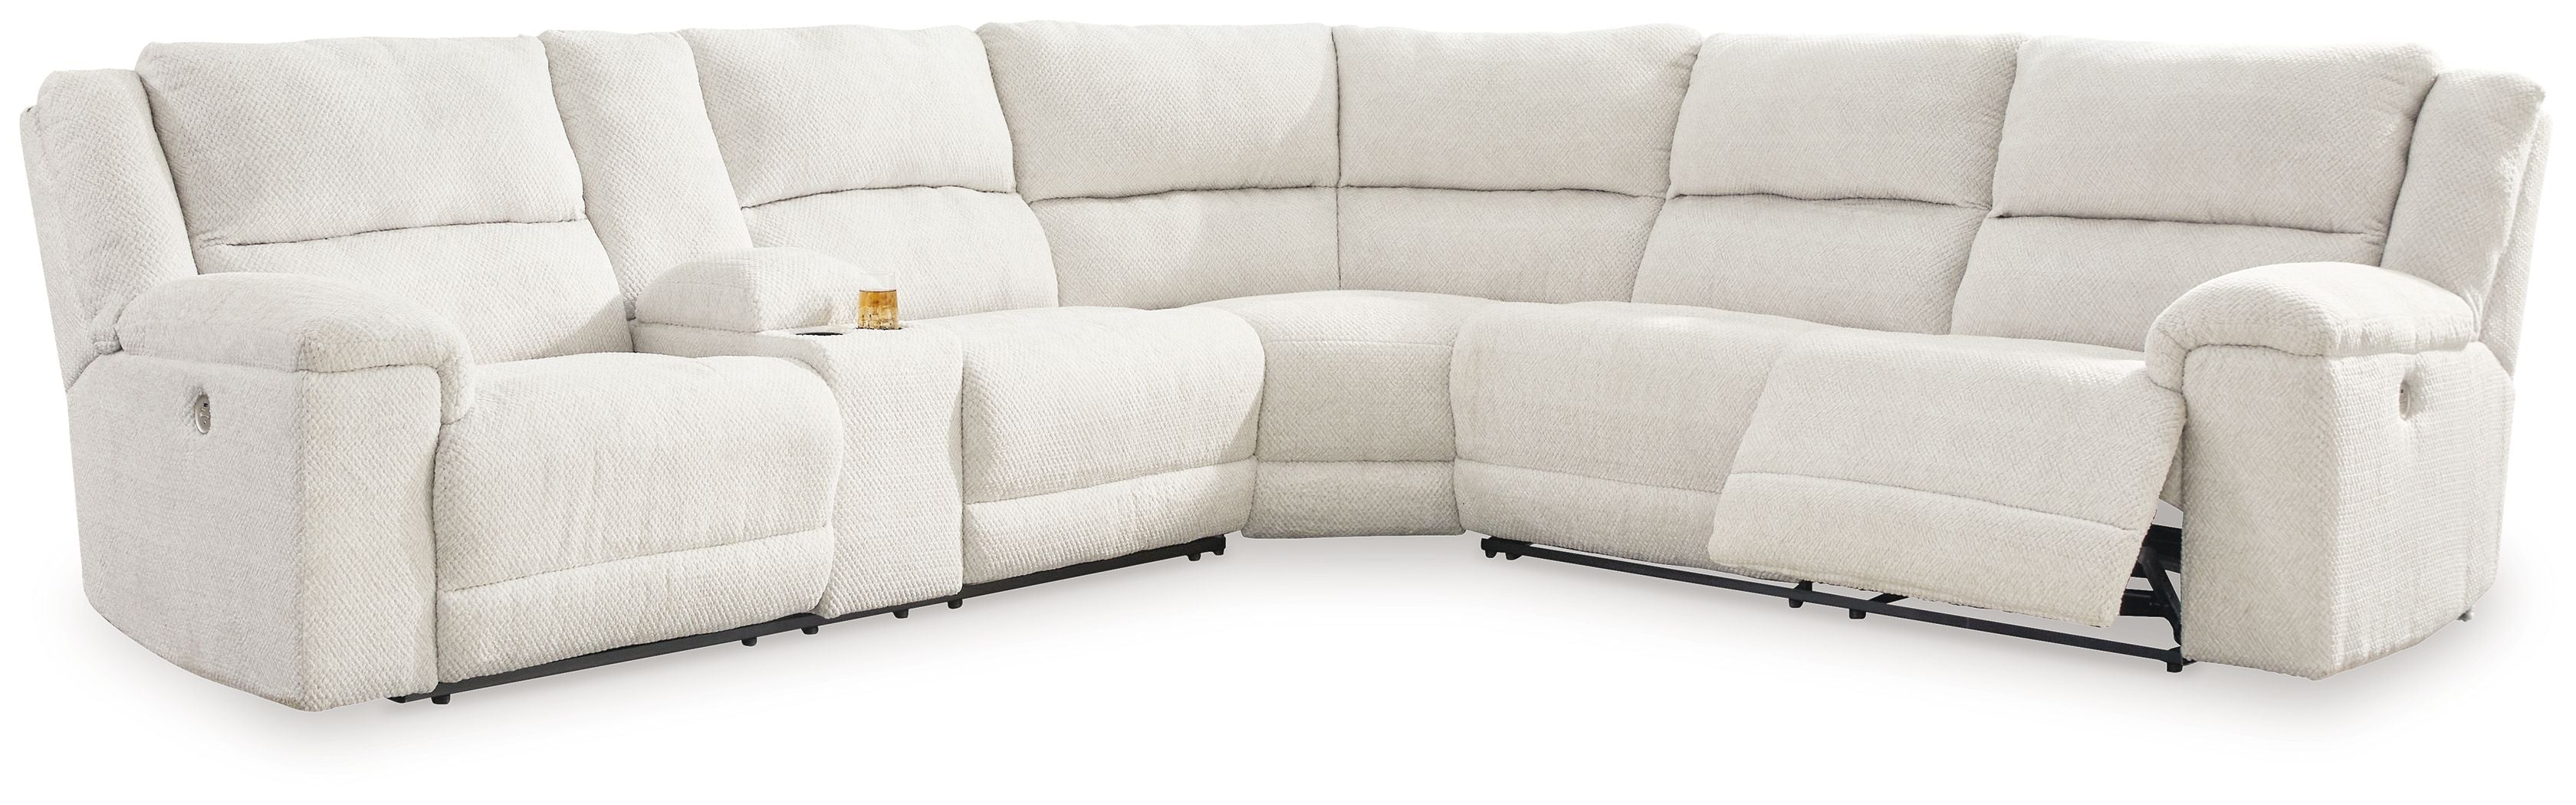 Keensburg White Power Reclining Sectional